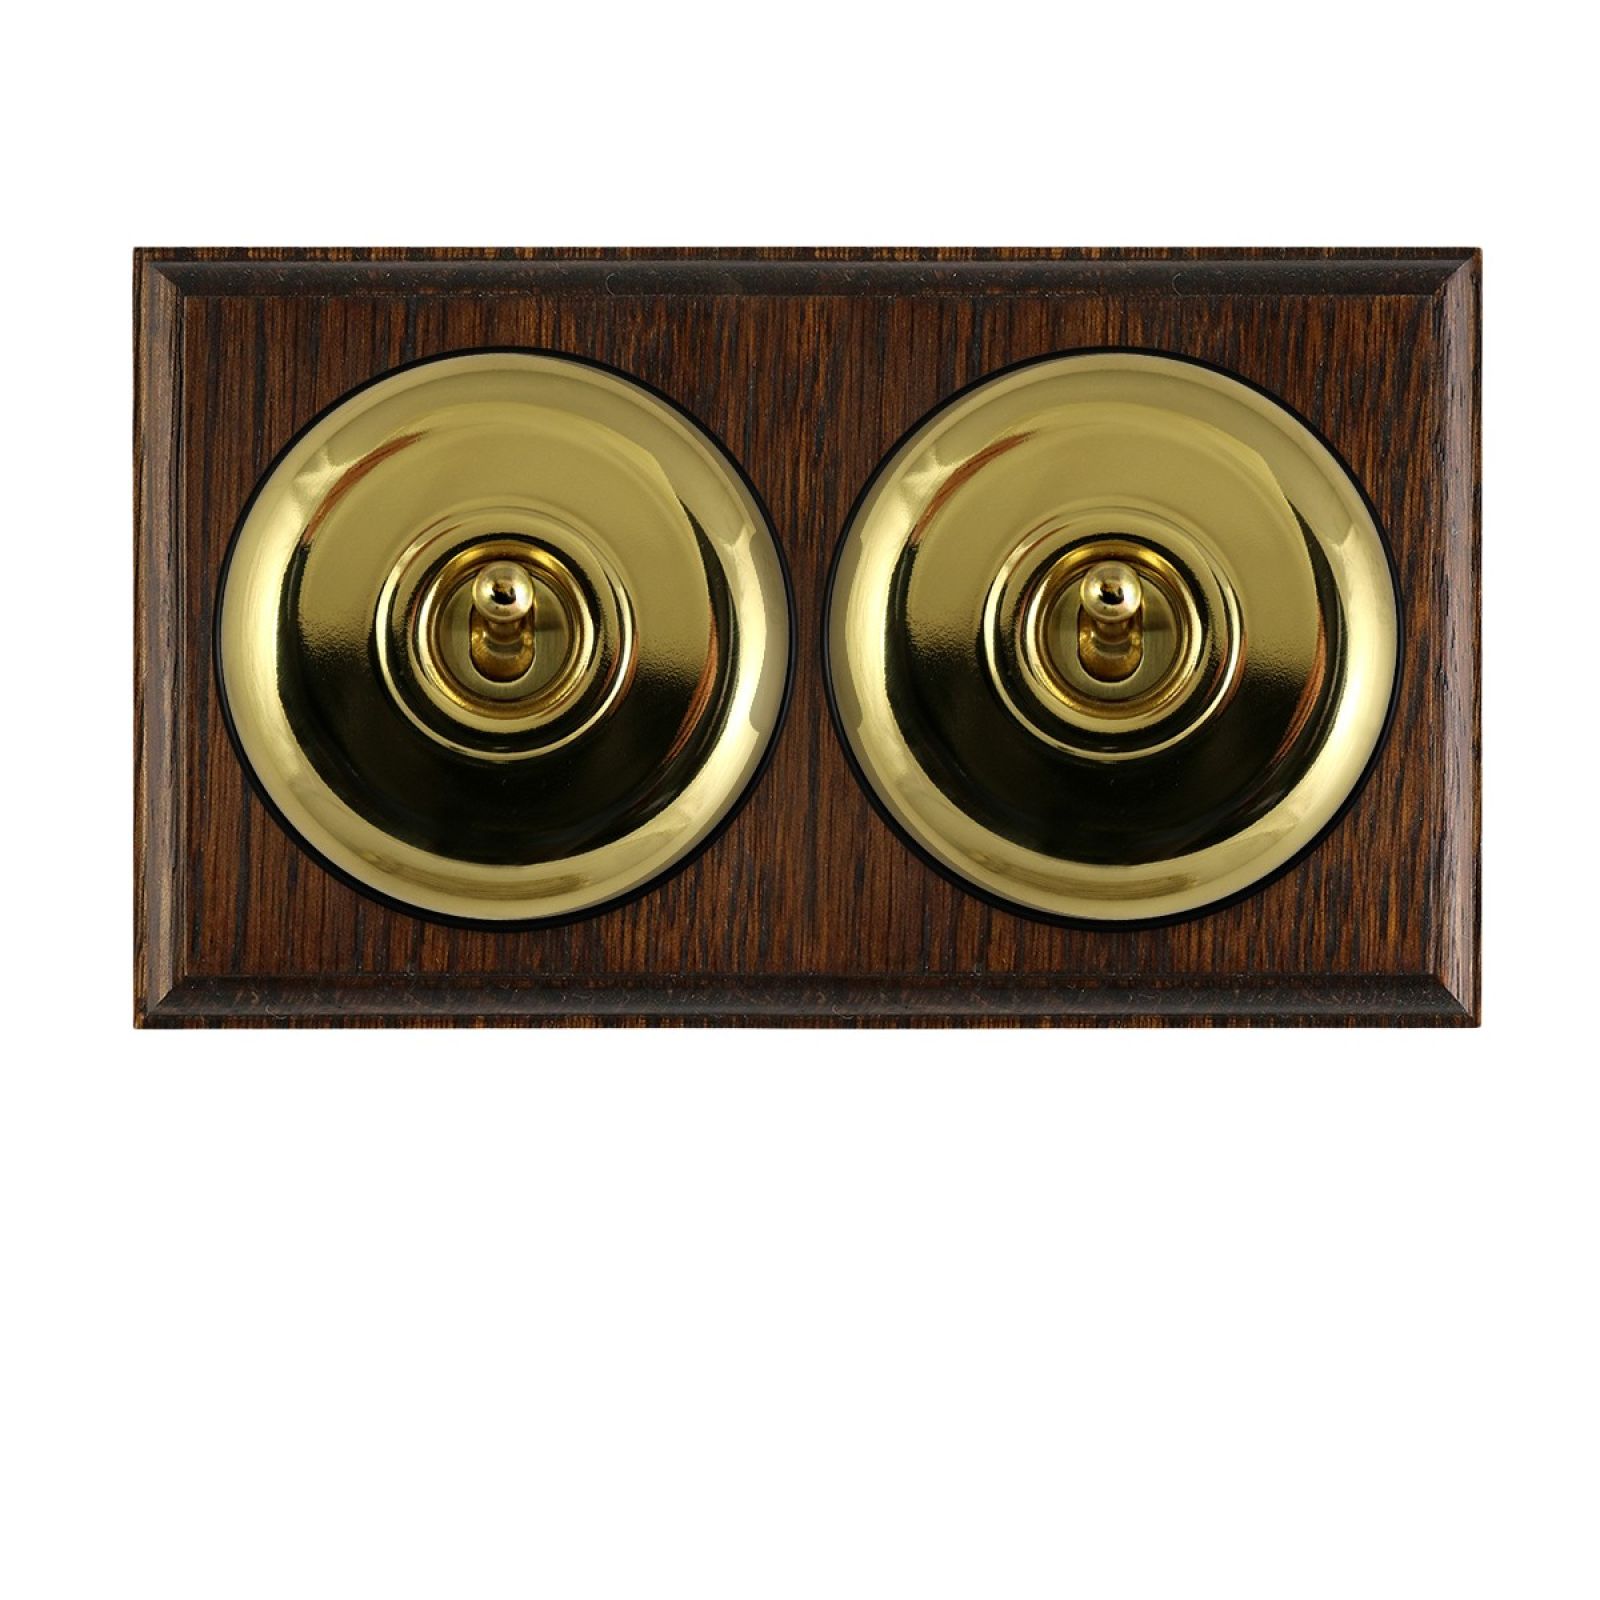 2 gang period light switch - plain in a choice of finishes